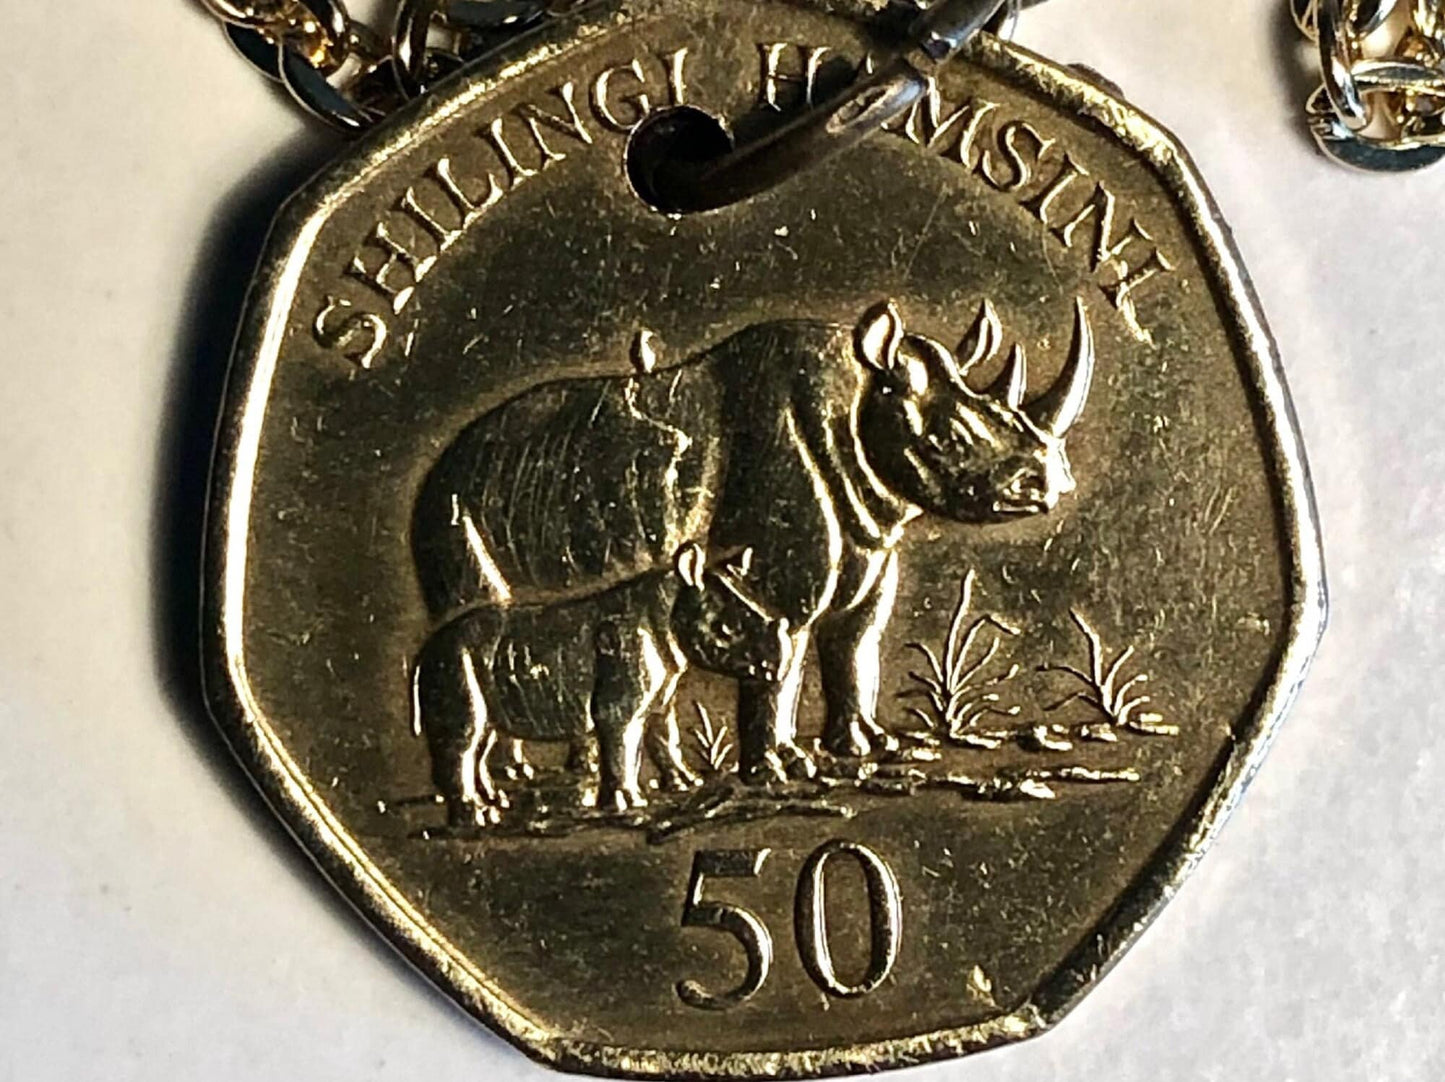 Tanzania 50 Shilling Coin Pendant Necklace Tanzanian Personal Vintage Handmade Jewelry Gift Friend Charm For Him Her World Coin Collector